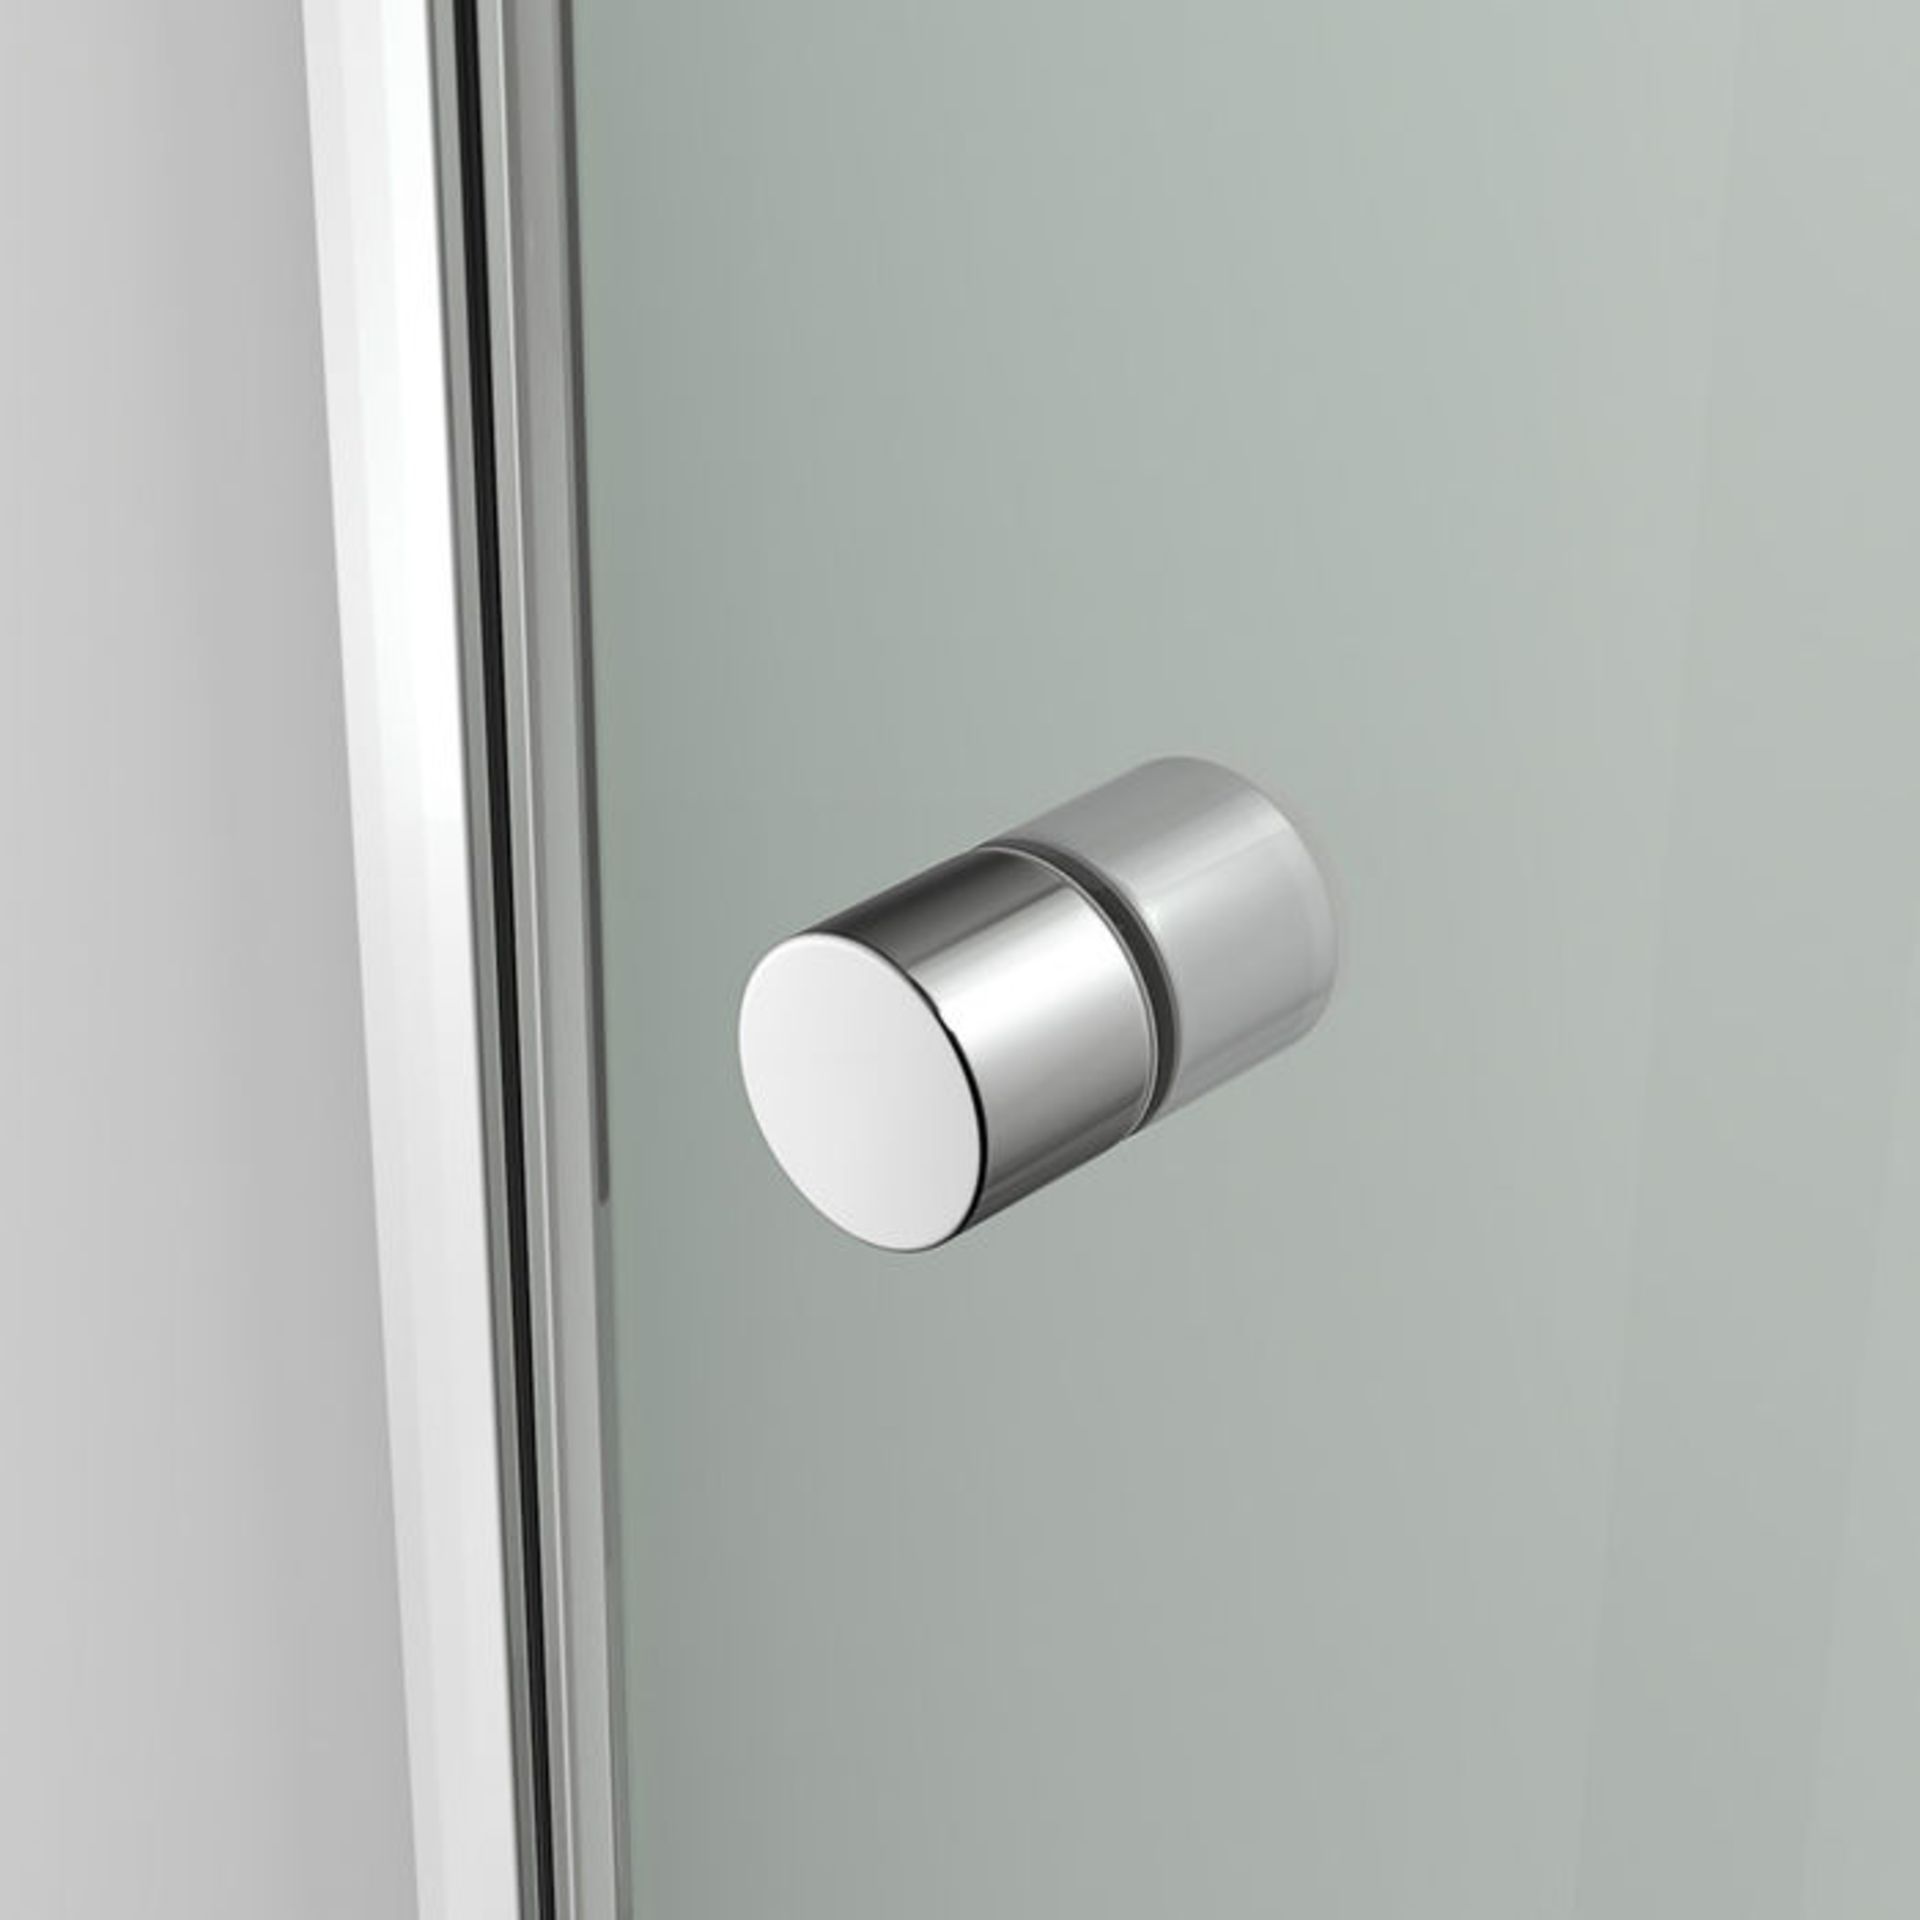 (G41) 1000mm - Elements Bi Fold Shower Door. RRP £299.99. 4mm Safety Glass Fully waterproof tested - Image 7 of 8